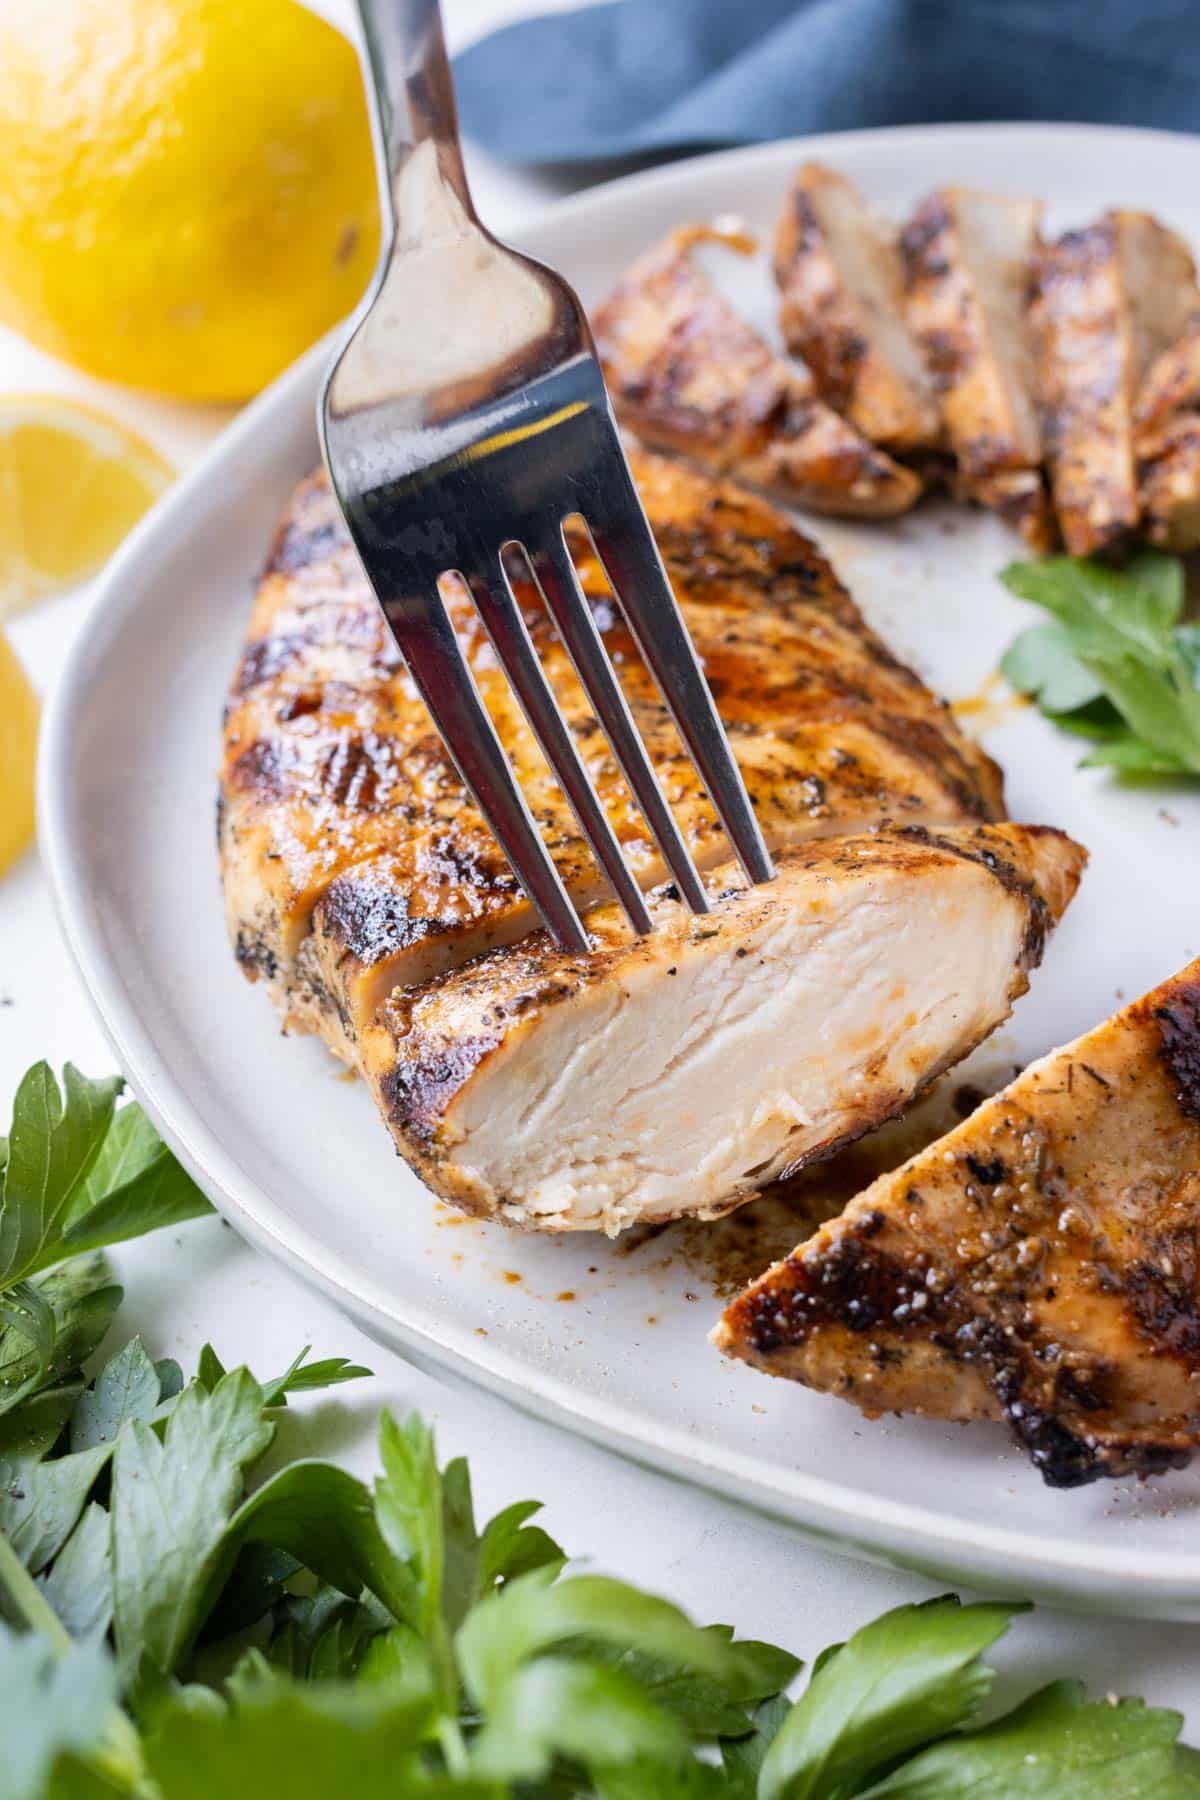 Balsamic grilled chicken breast is sliced on a plate.